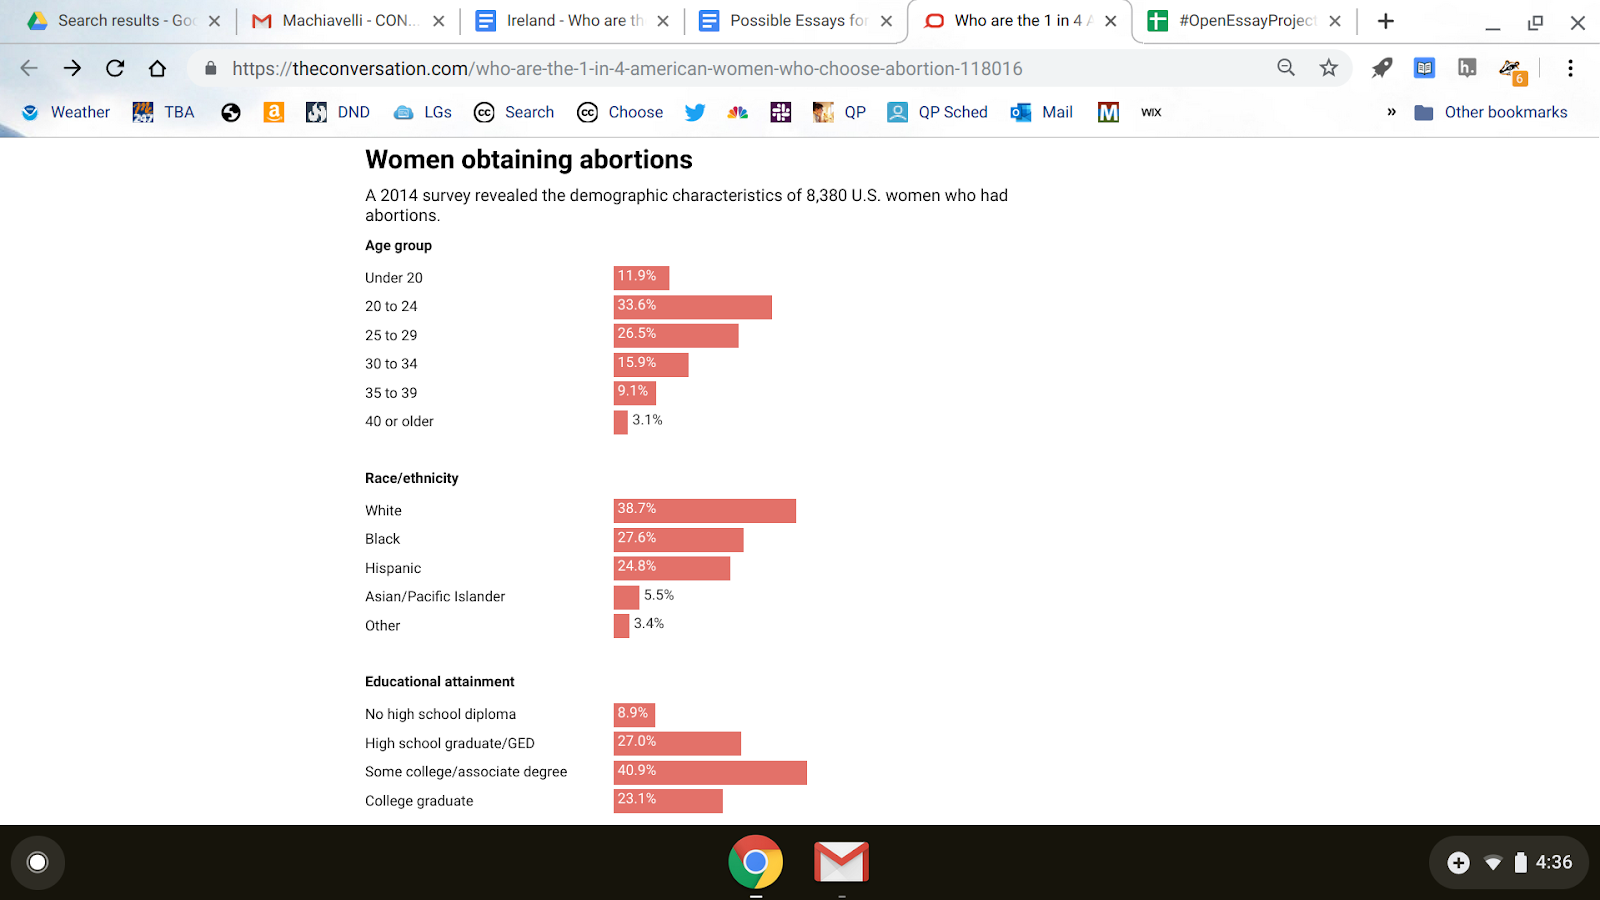 Image displaying statistics over women obtaining abortions